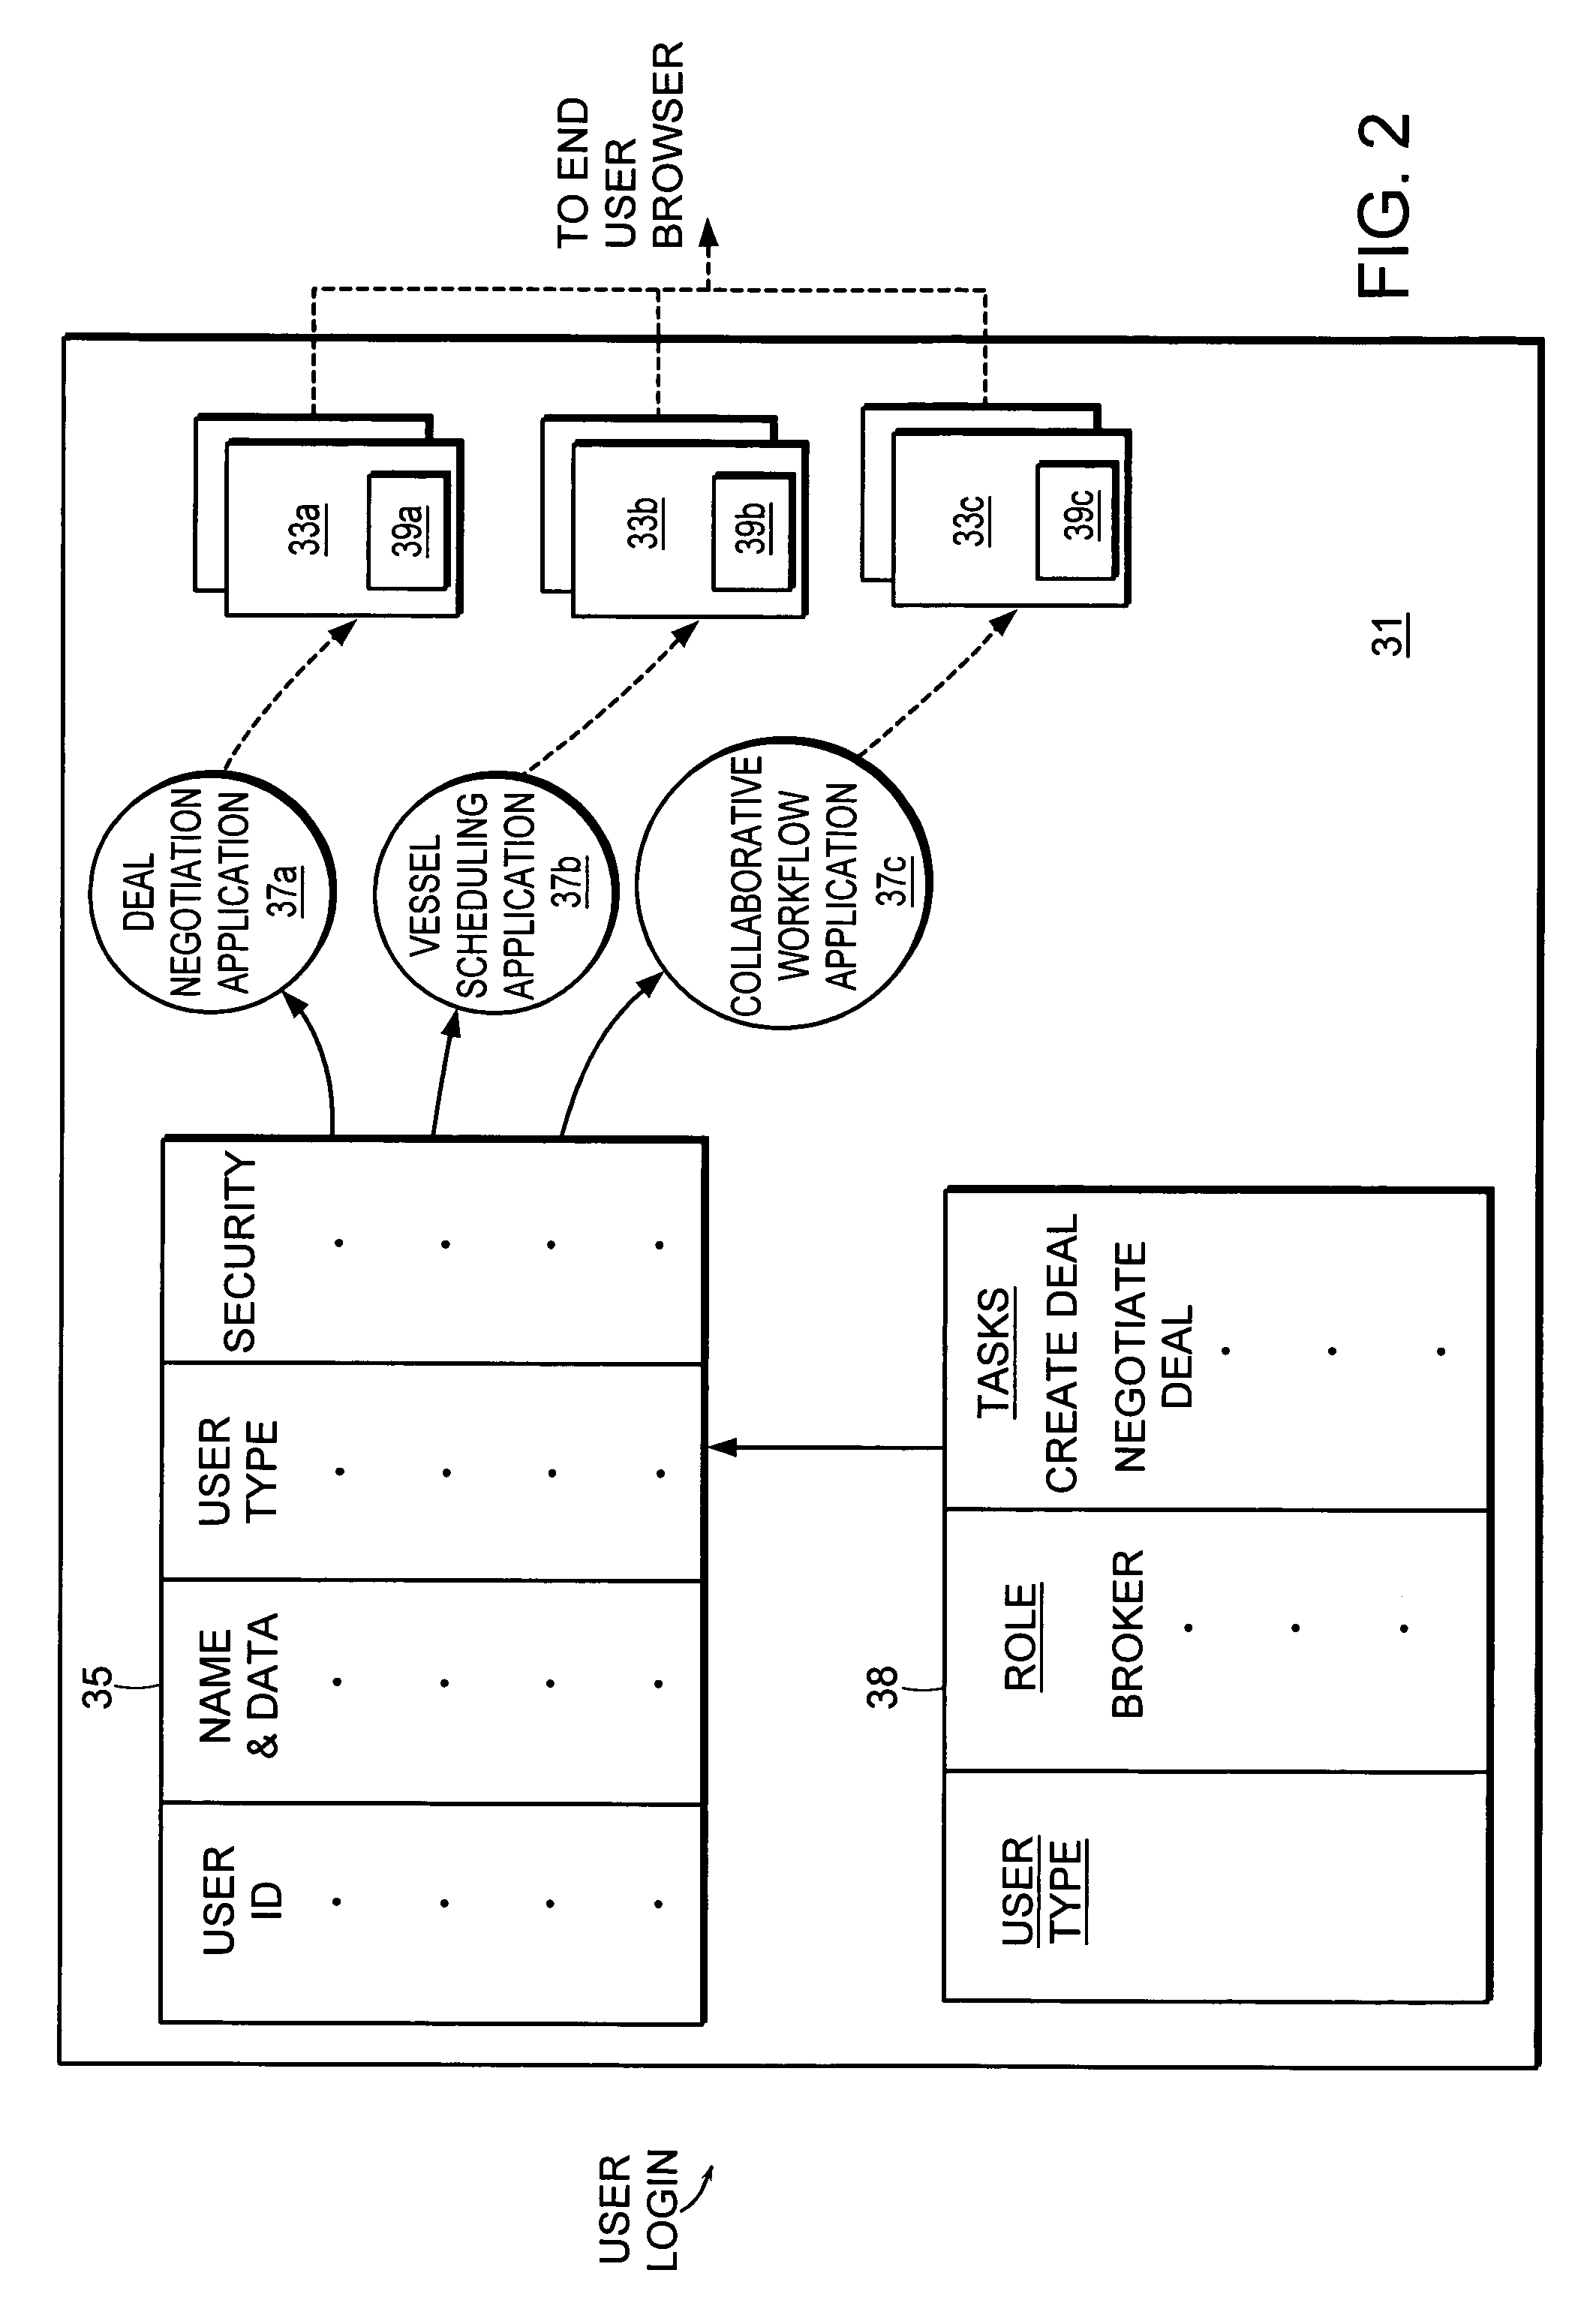 Computer method and apparatus for vessel selection and optimization